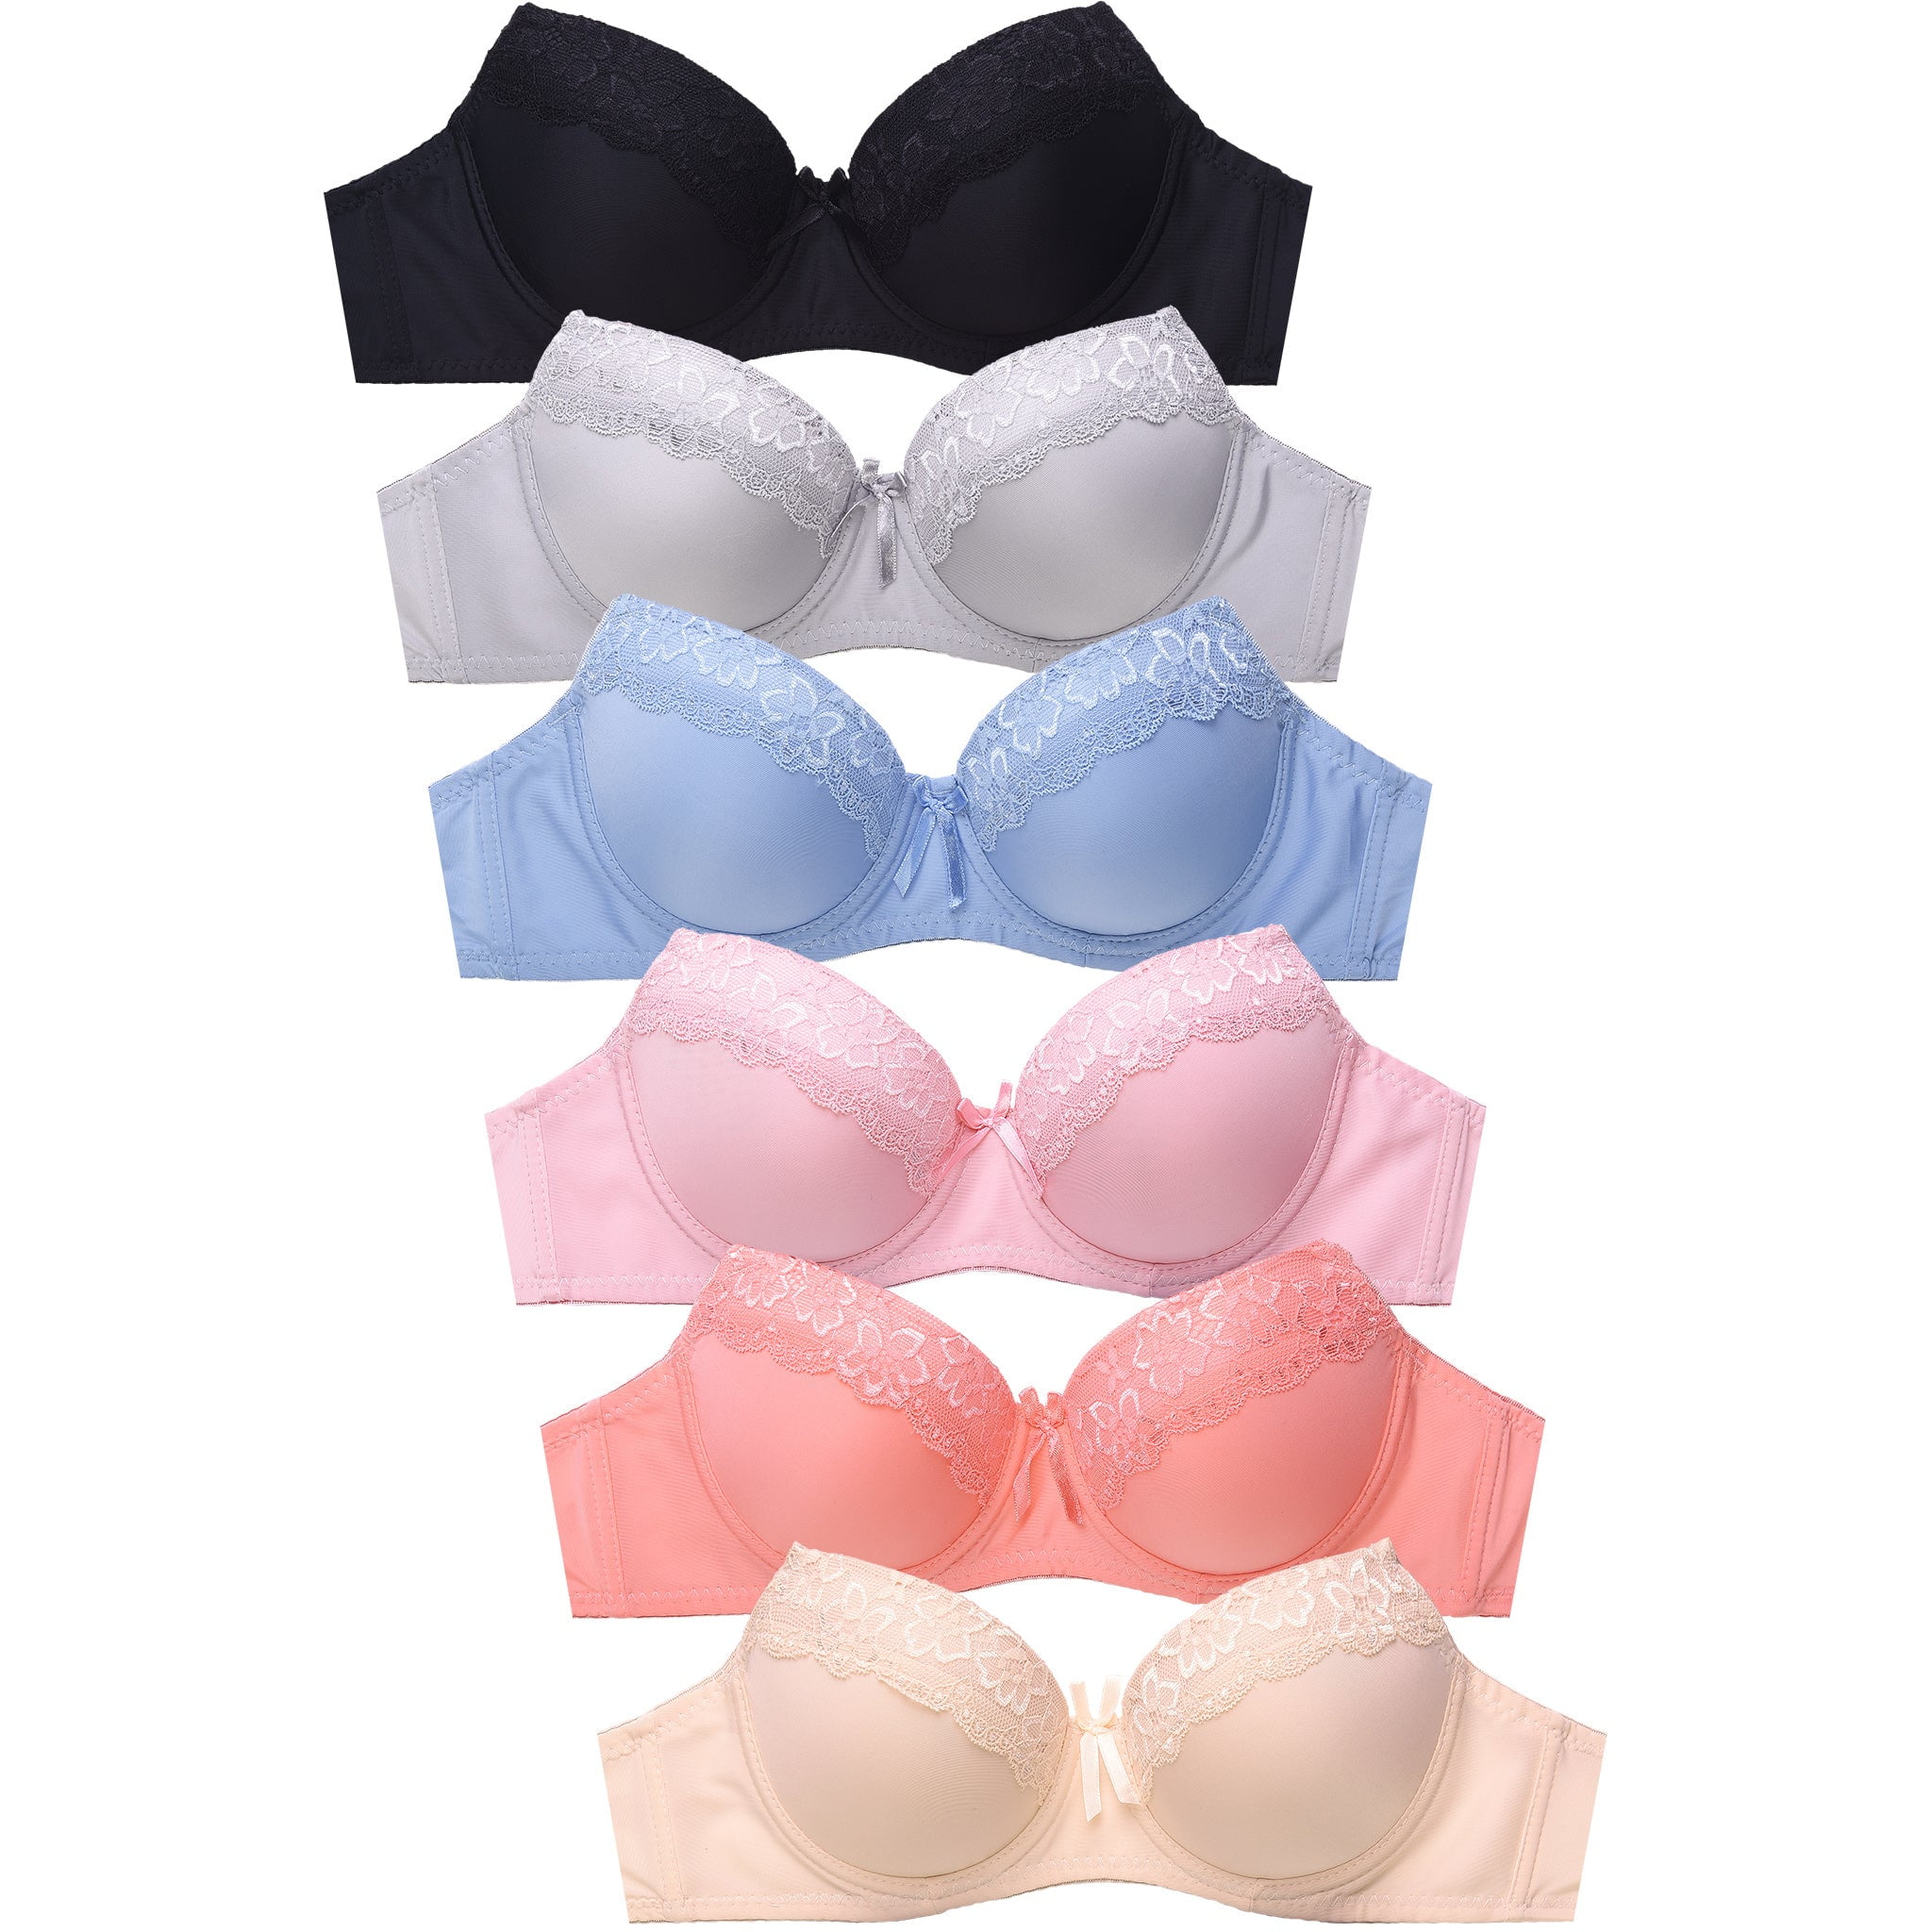 PACK OF 6 Women's Essentials Mamia Full Coverage Underwire Solid Bras 247  Frenzy